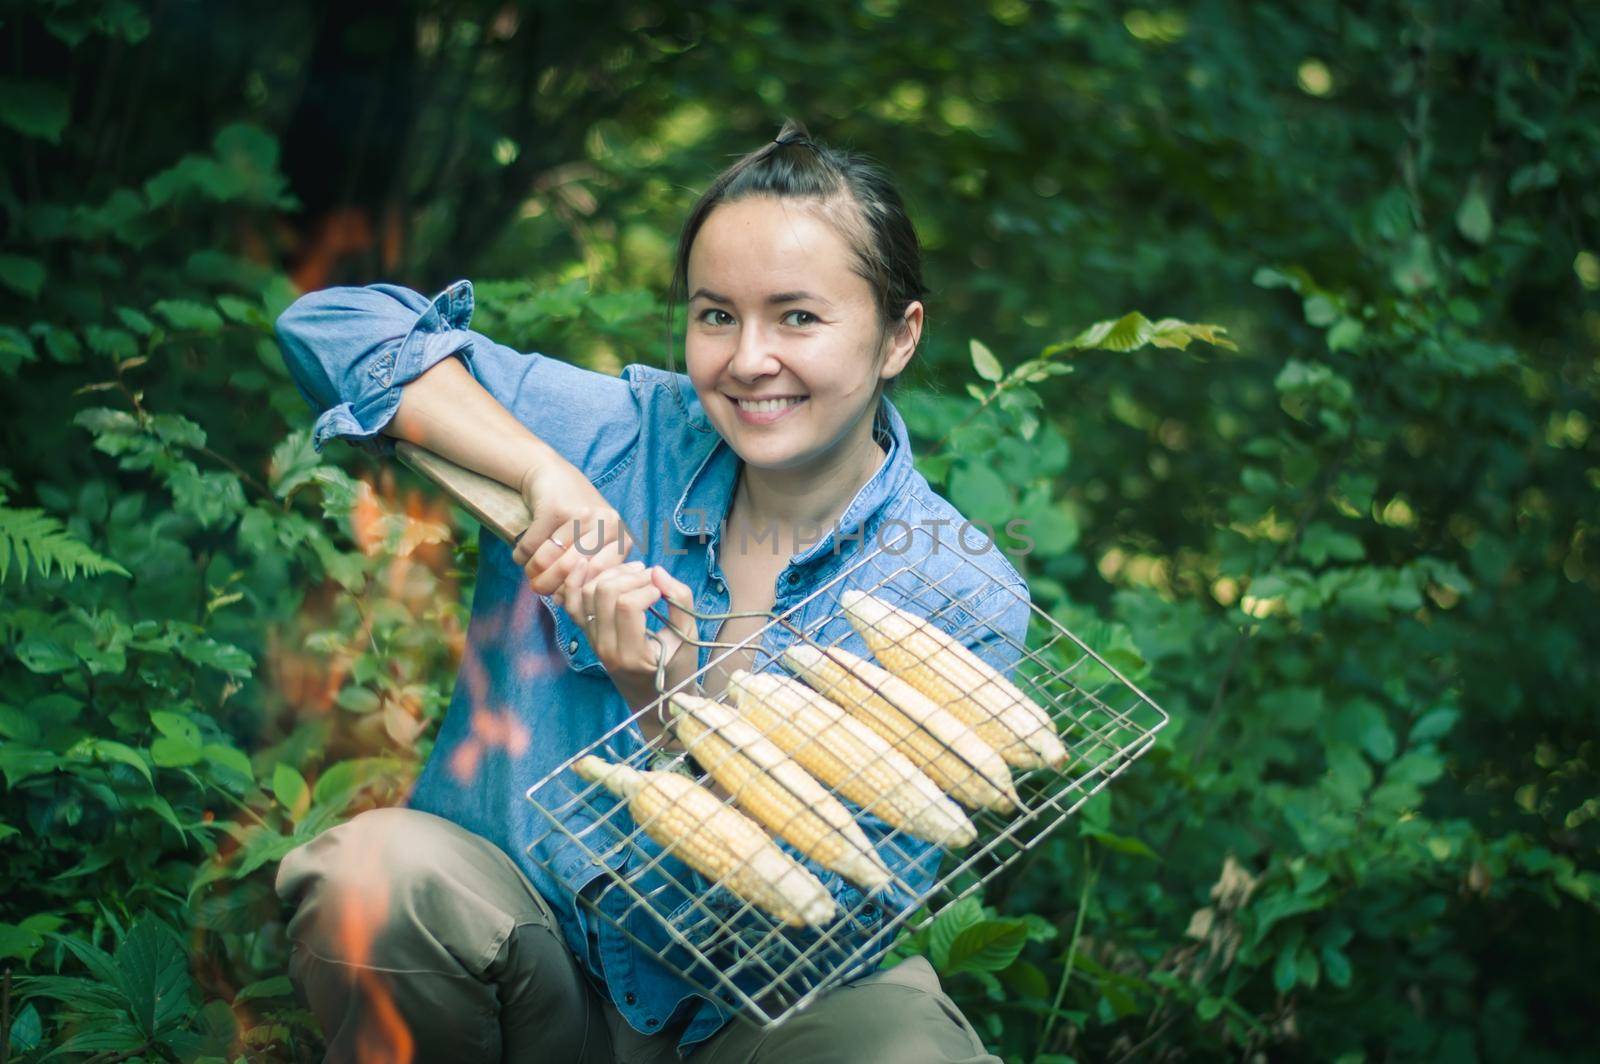 corn cooked in nature on a barbecue. High quality photo